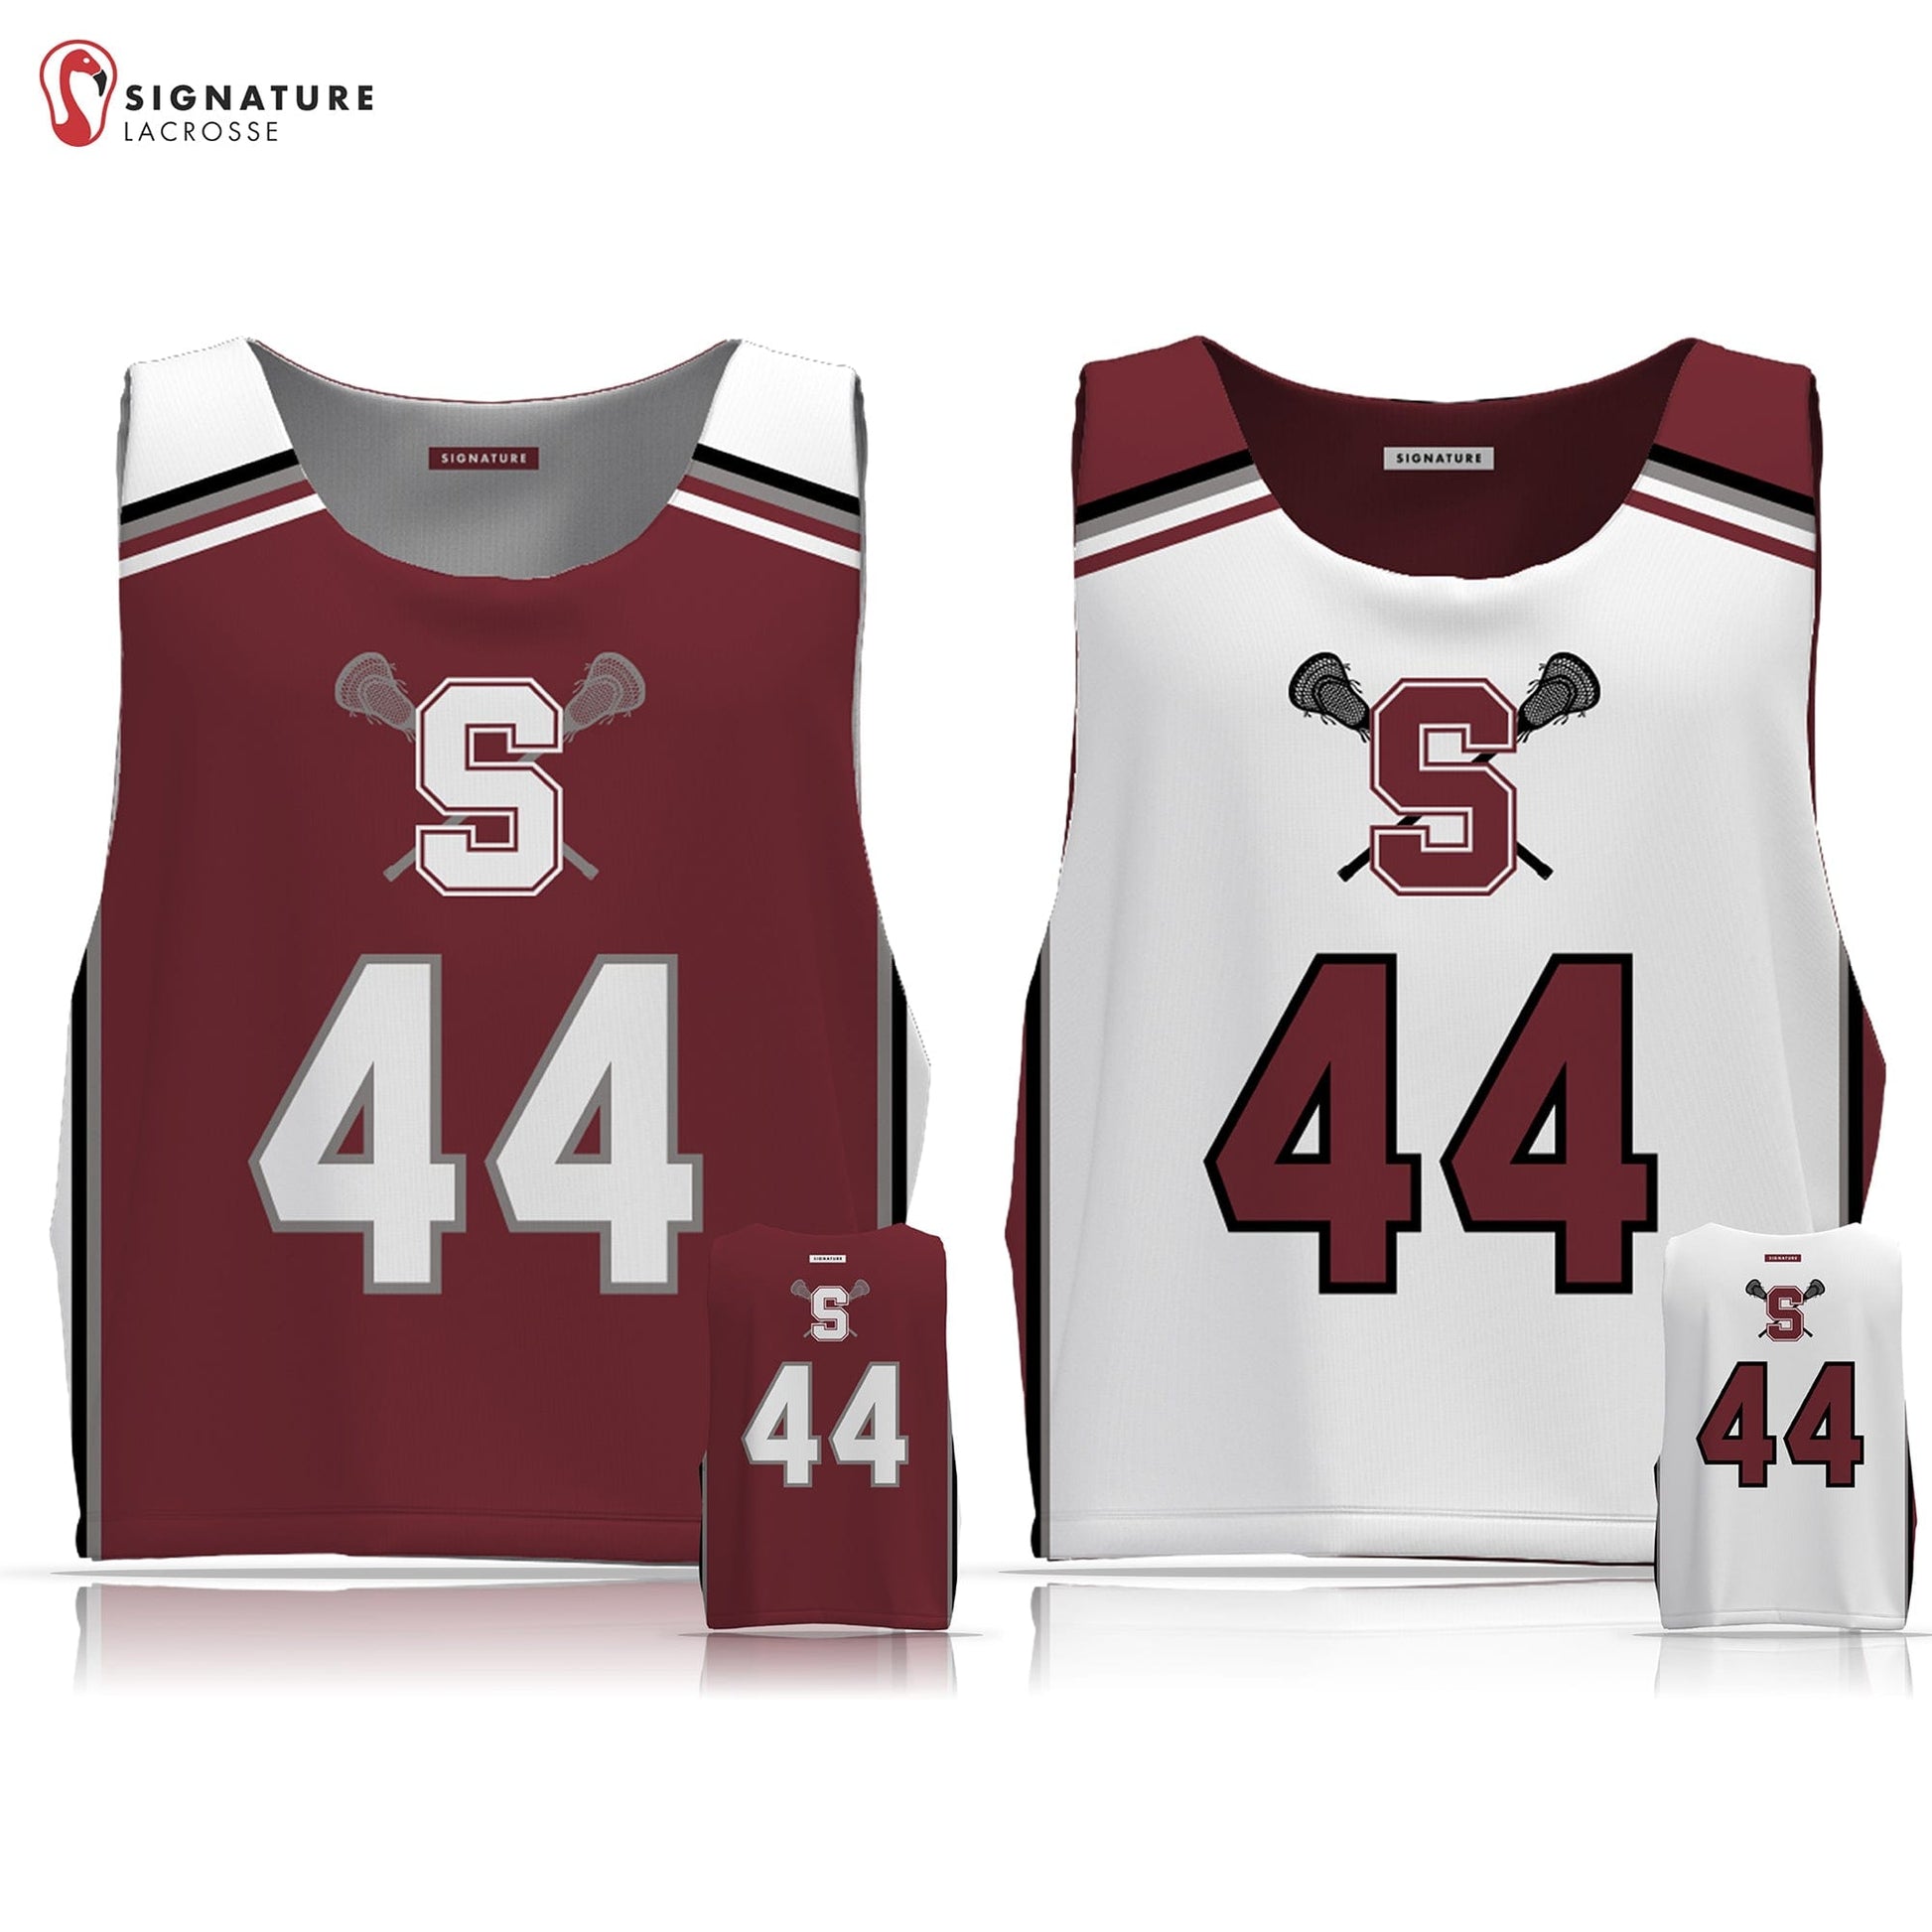 State College Men's Player Reversible Game Pinnie: 3-4 Signature Lacrosse